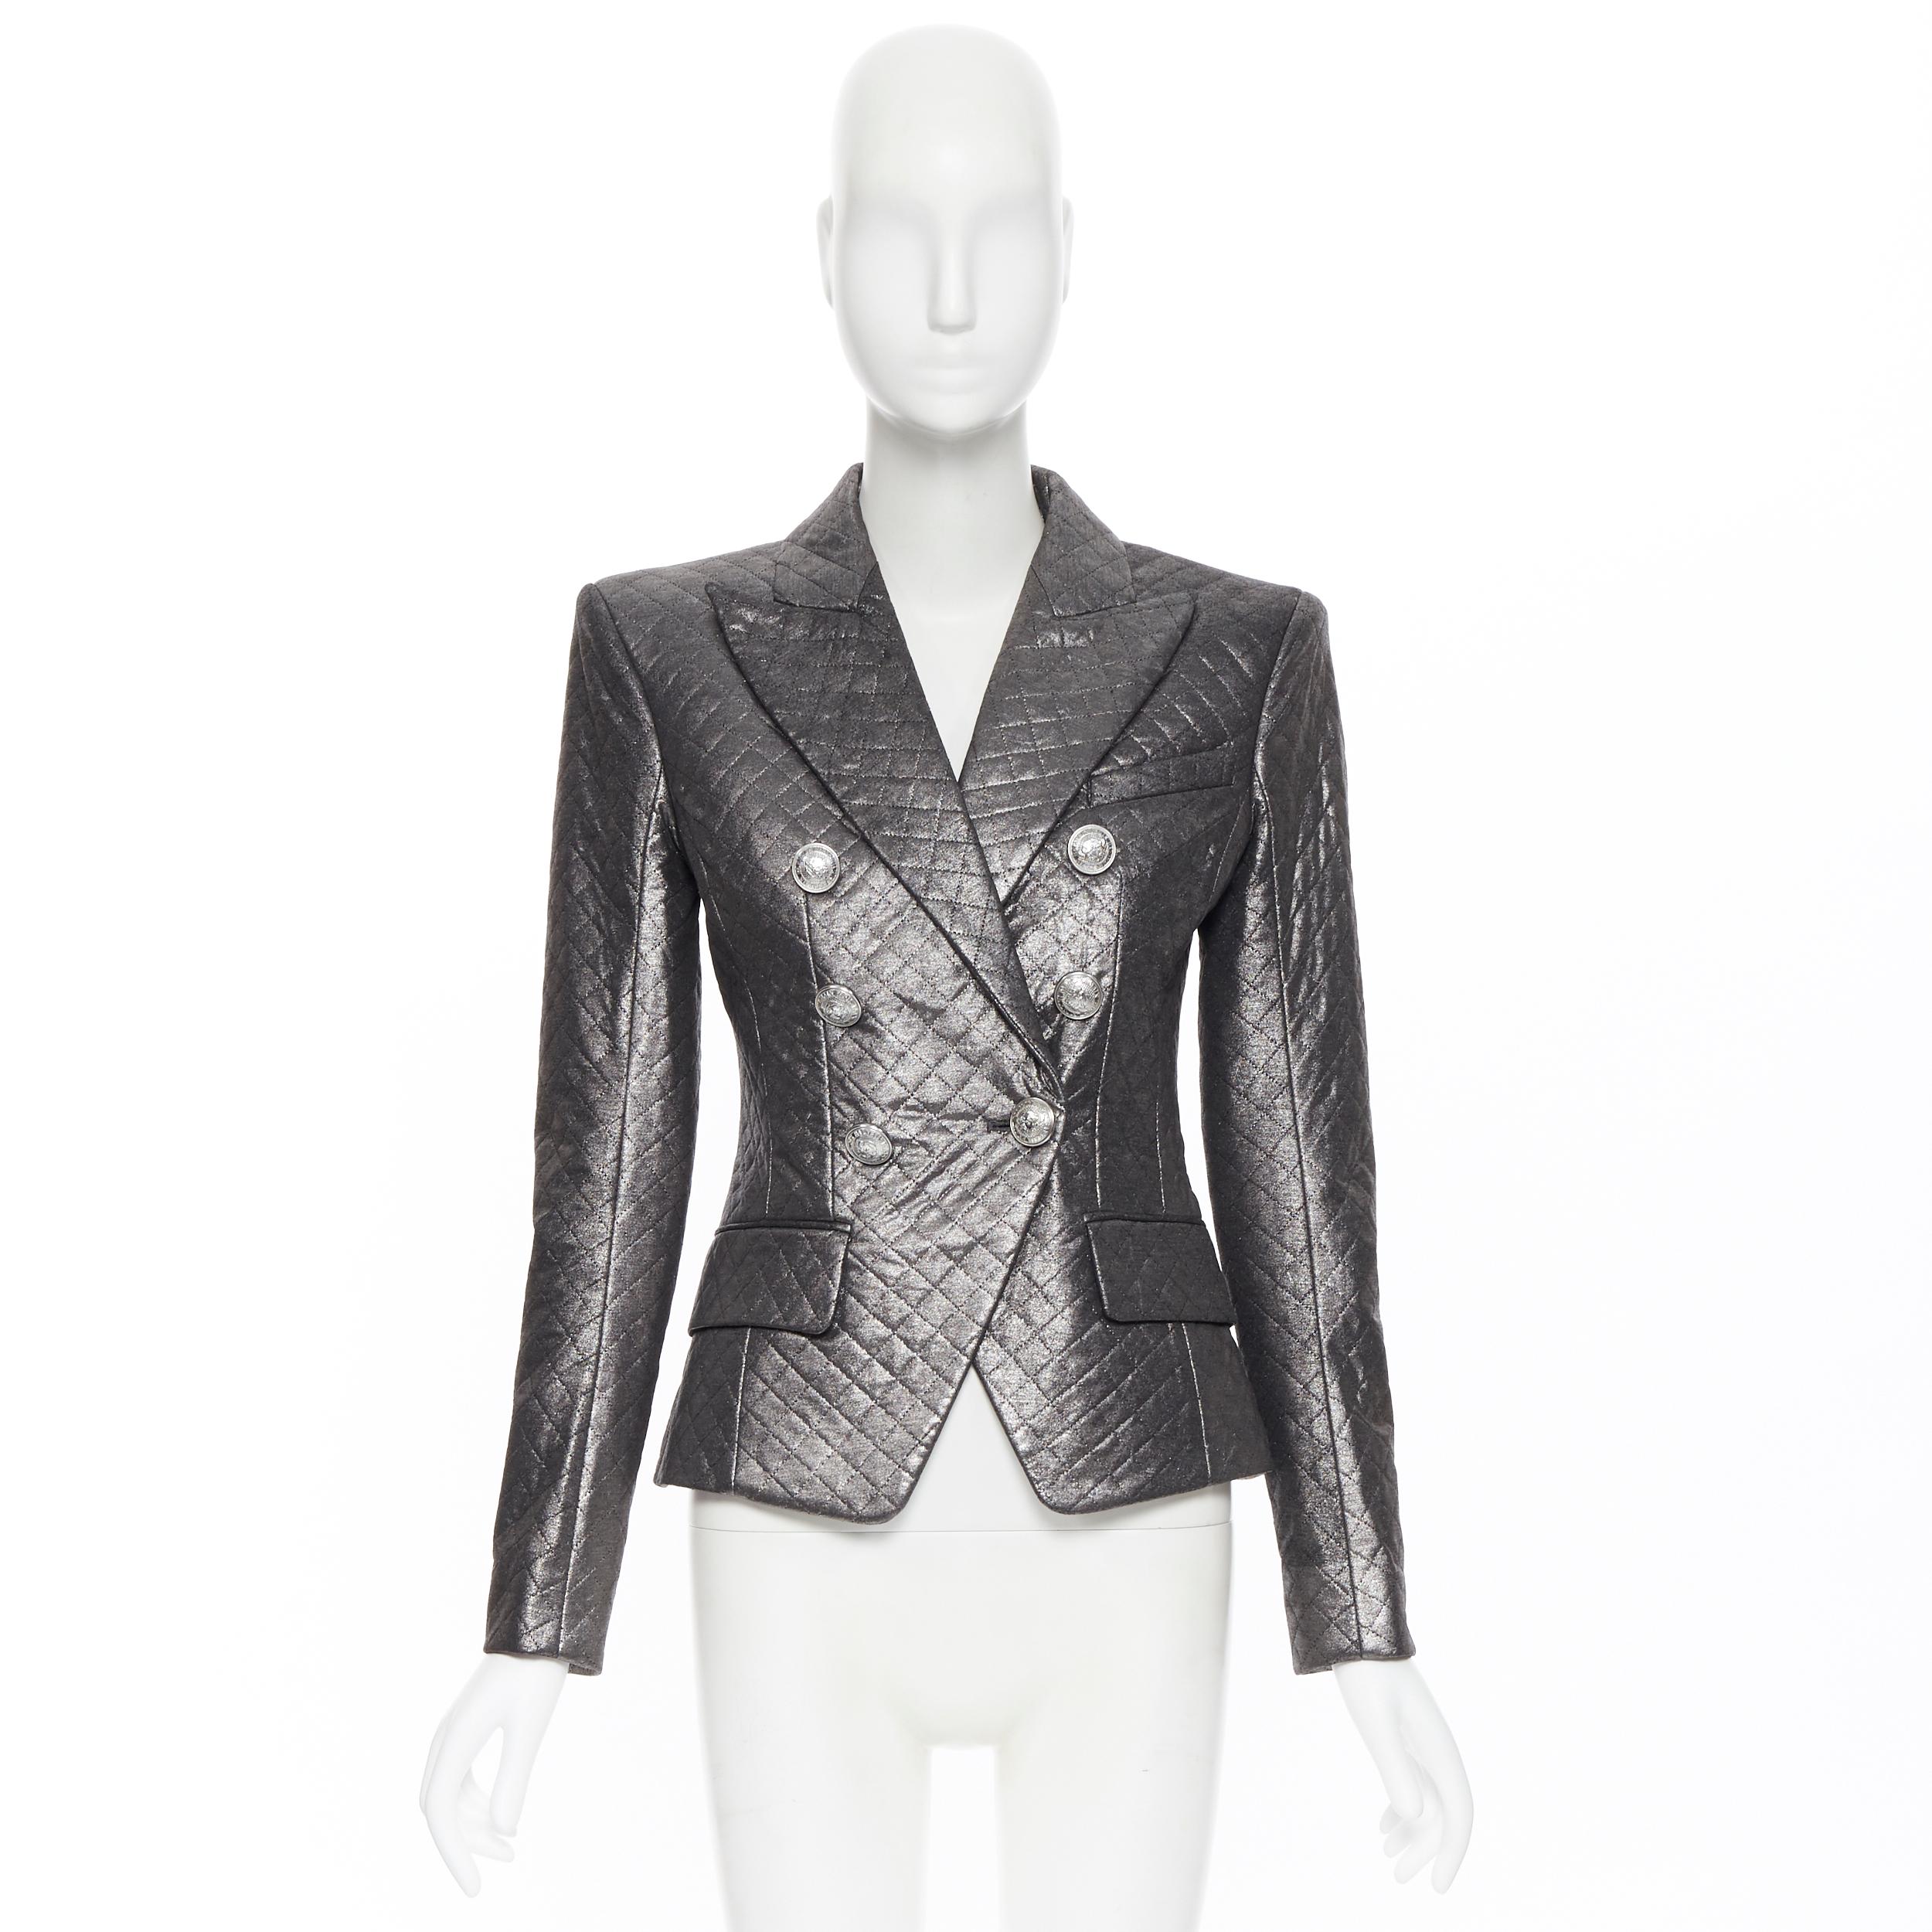 new BALMAIN silver diamond quilted military double breasted blazer jacket FR38 M
Brand: Balmain
Designer: Olivier Rousteing
Model Name / Style: Double breasted jacket
Material: Viscose
Color: Silver
Pattern: Solid
Closure: Button
Extra Detail: A